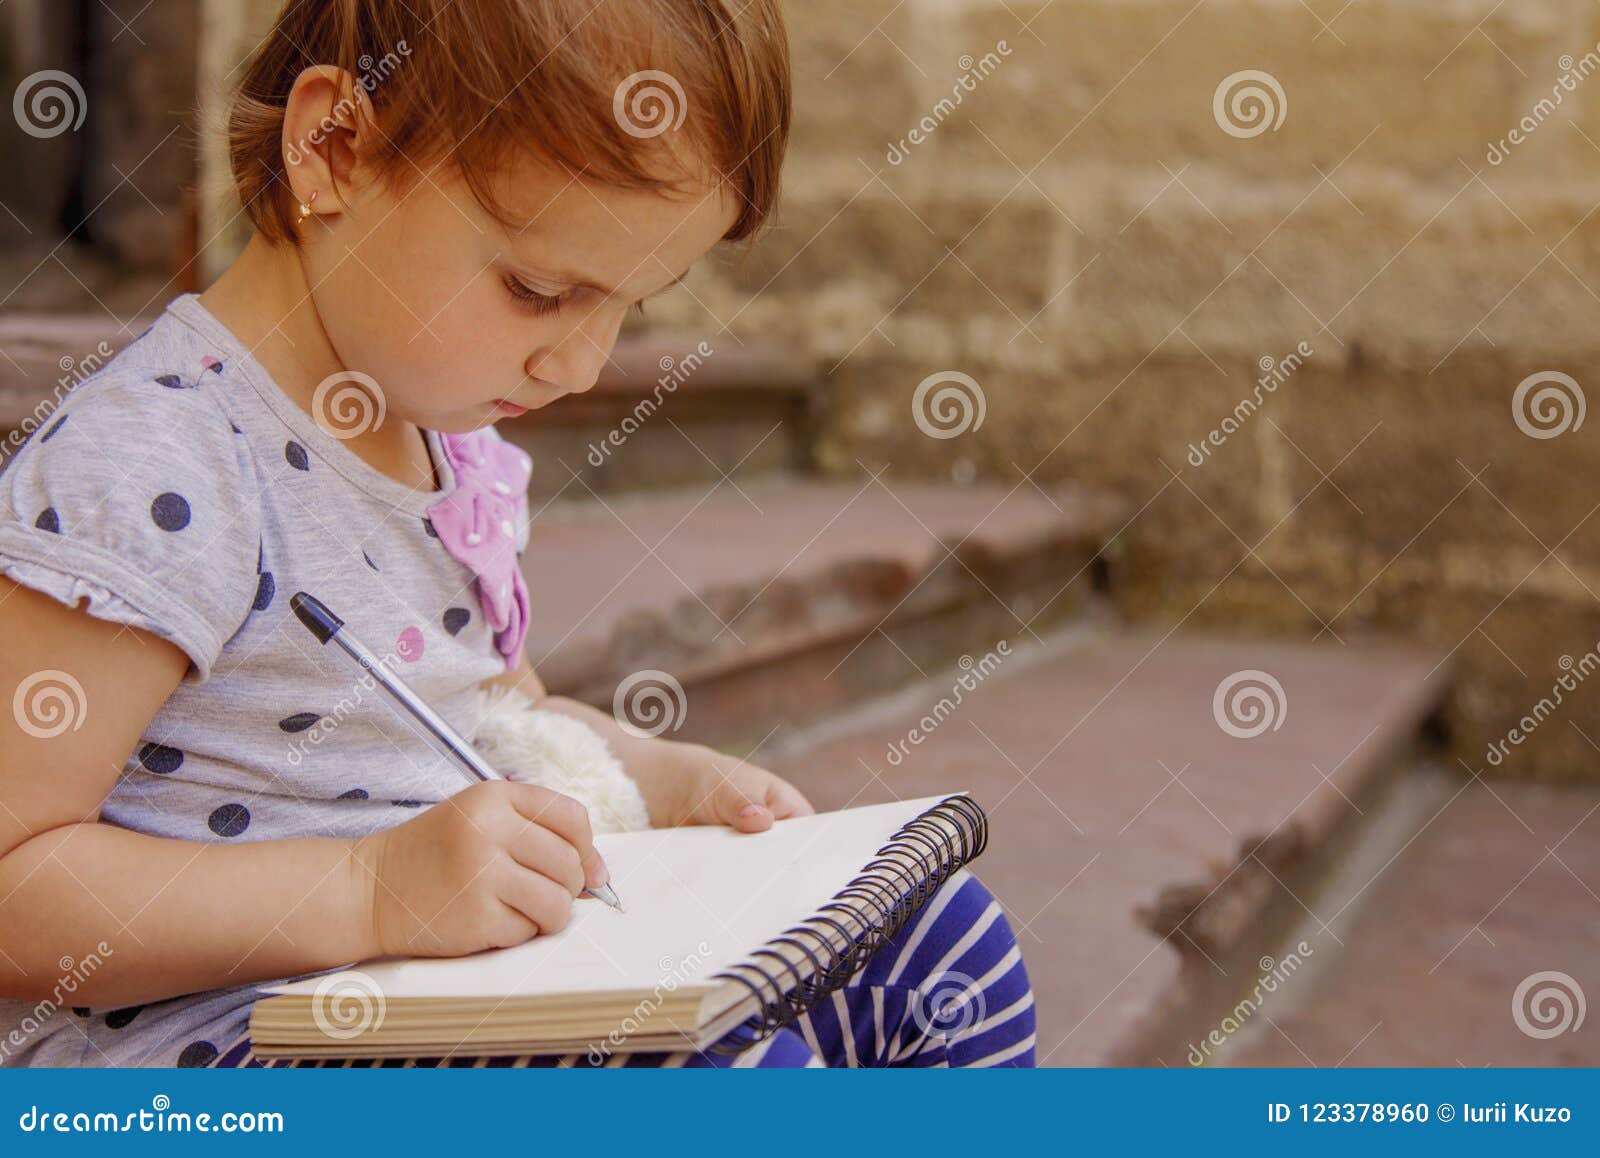 Writing a girl a letter